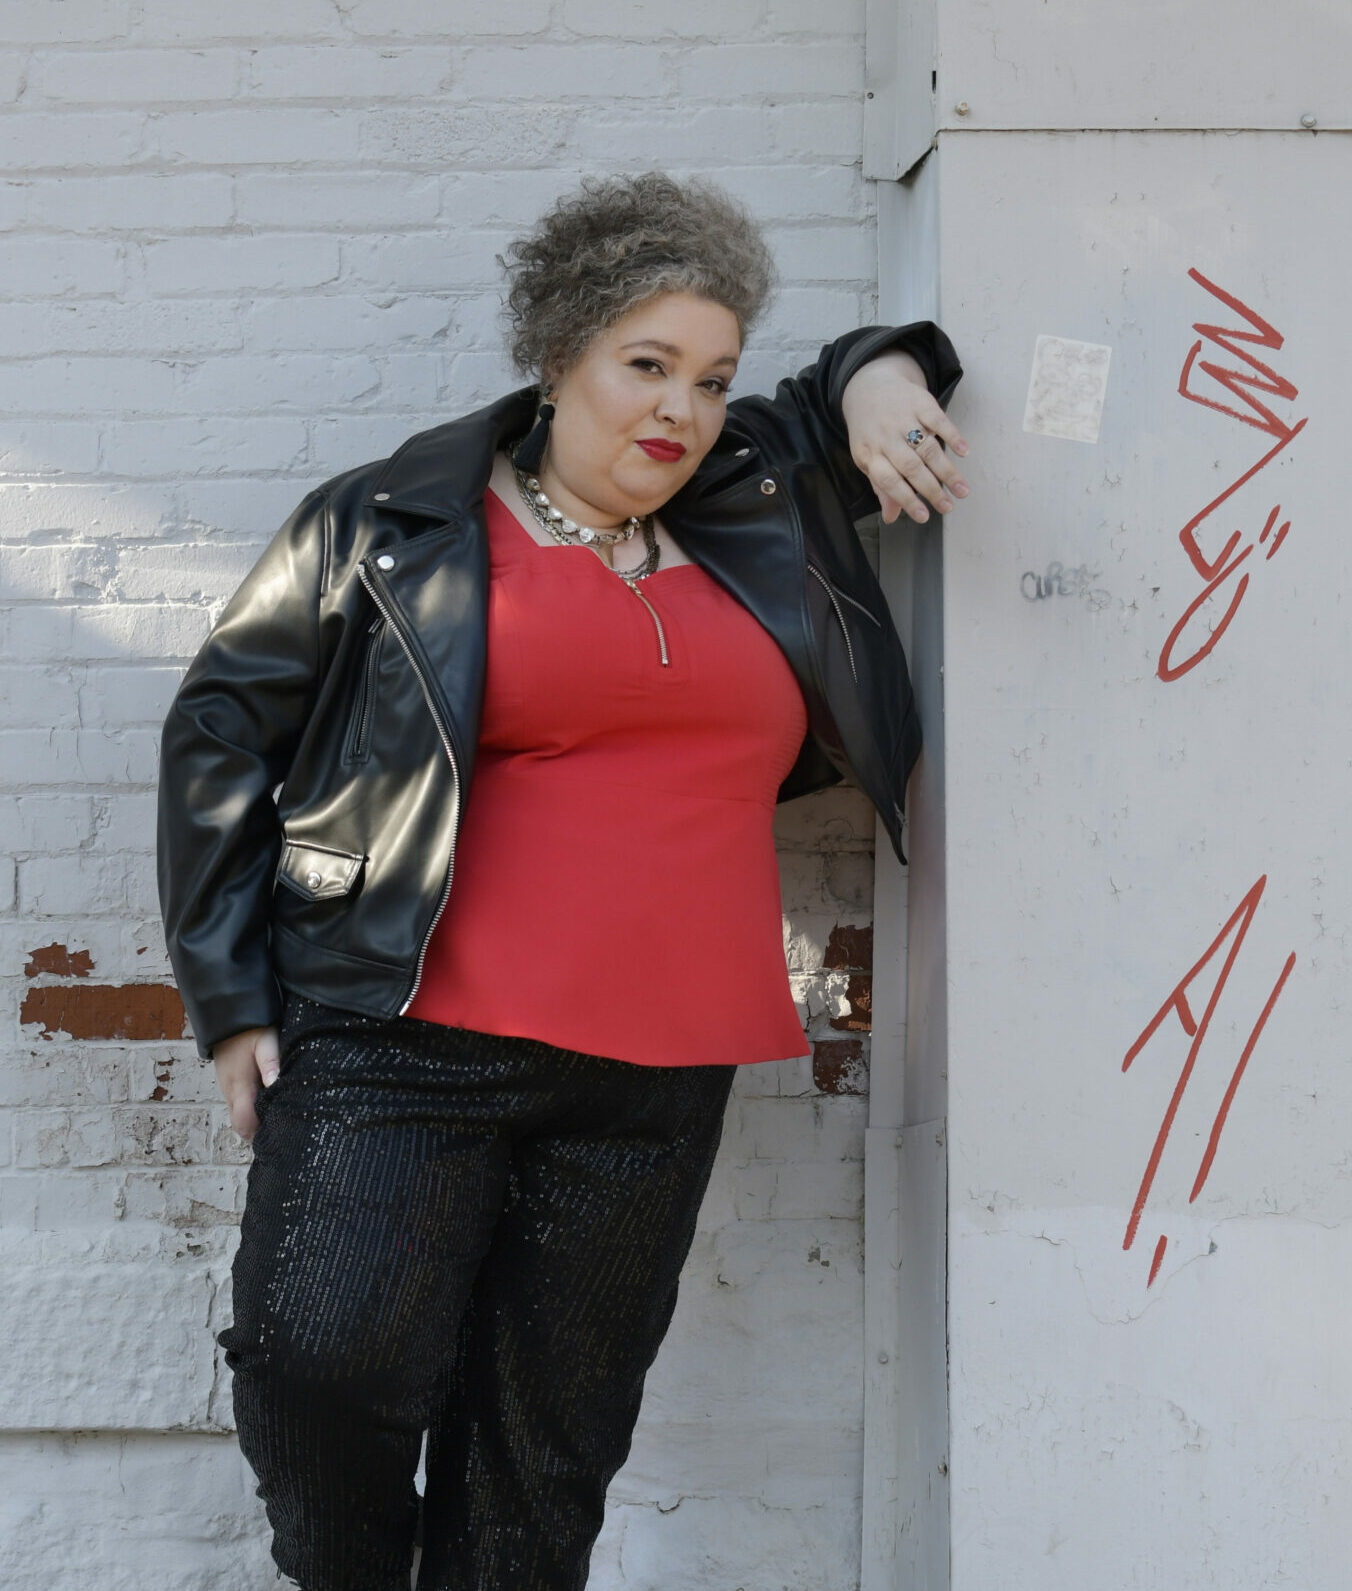 Lisa is dressed in a red tank top with black, sequined pants, a black leather jacket, and black boots. She is leaning against a brick wall with graffiti on it.